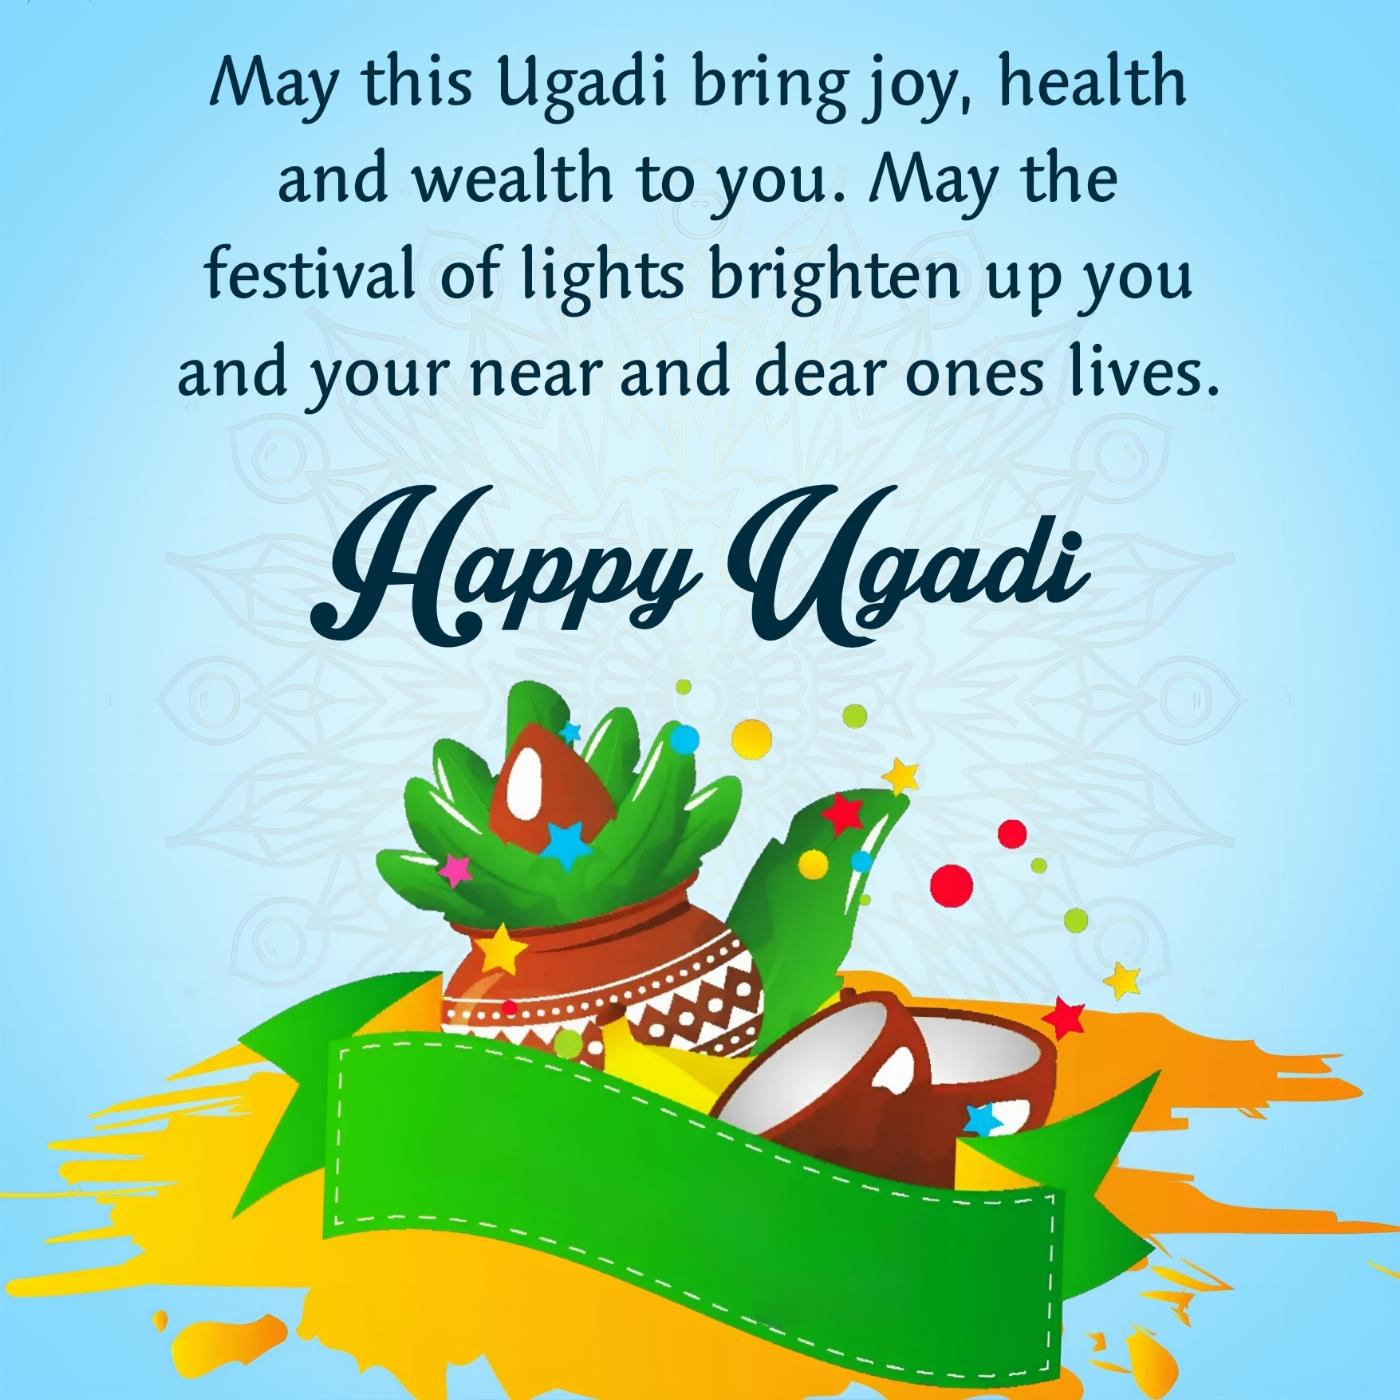 May this Ugadi bring joy health and wealth to you